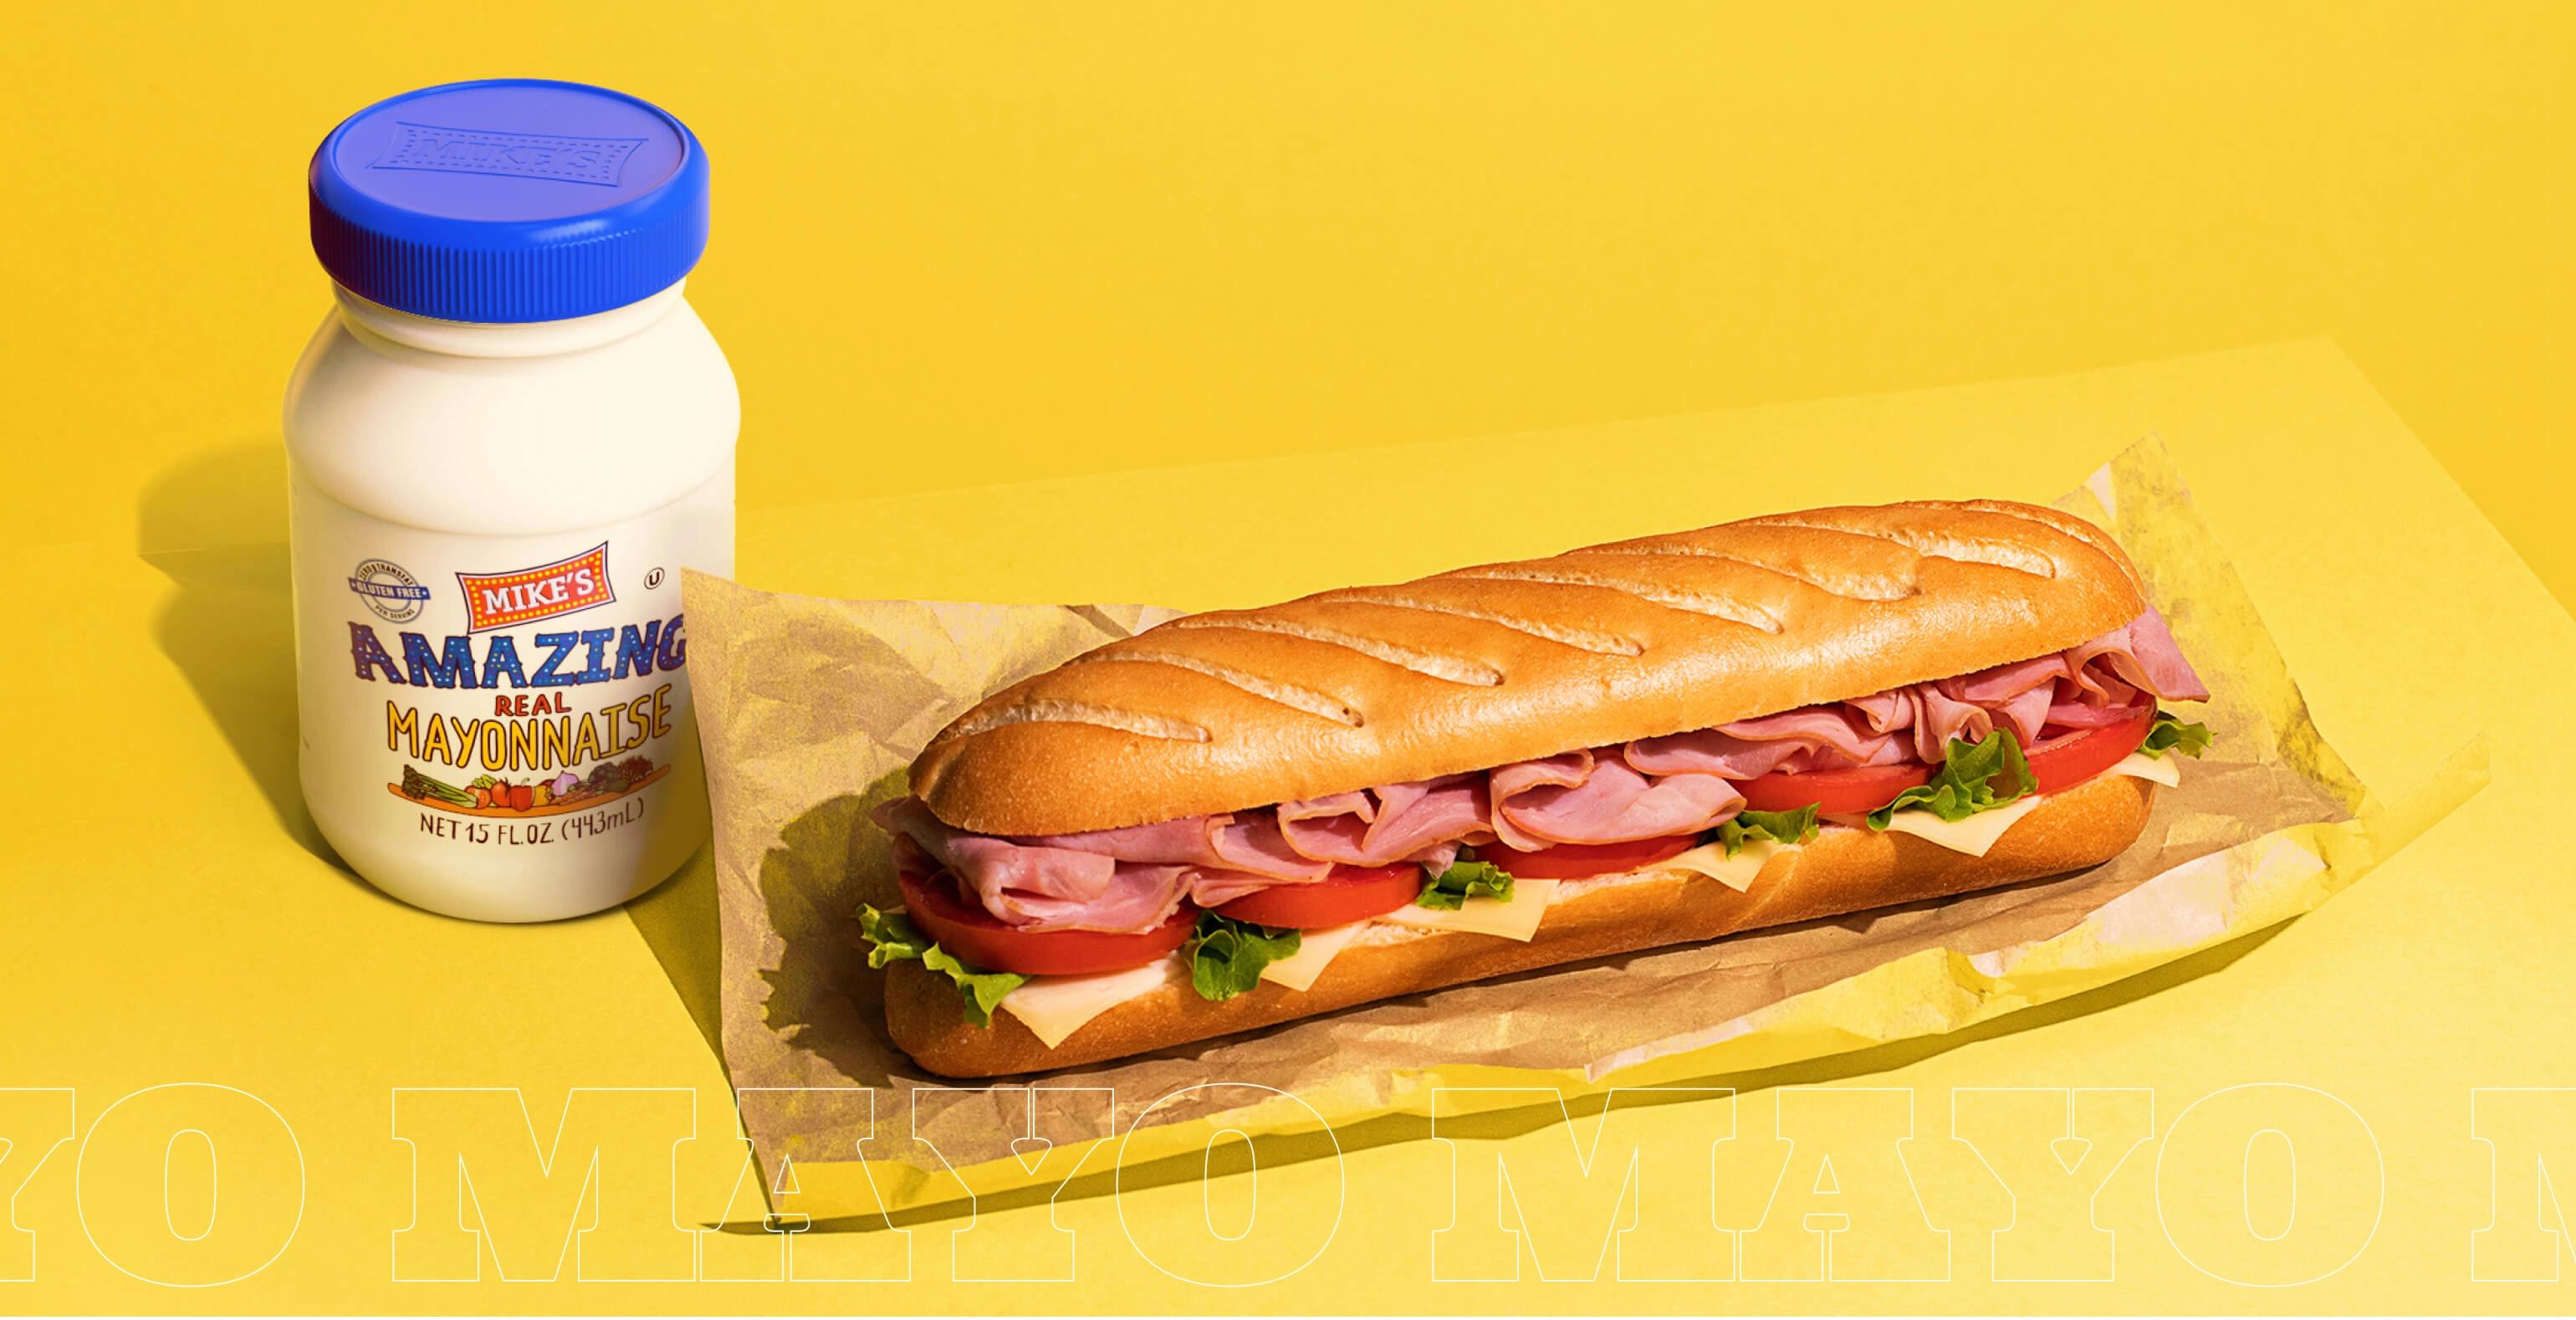 Mike's Amazing Mayonnaise next to a tasty sandwich.